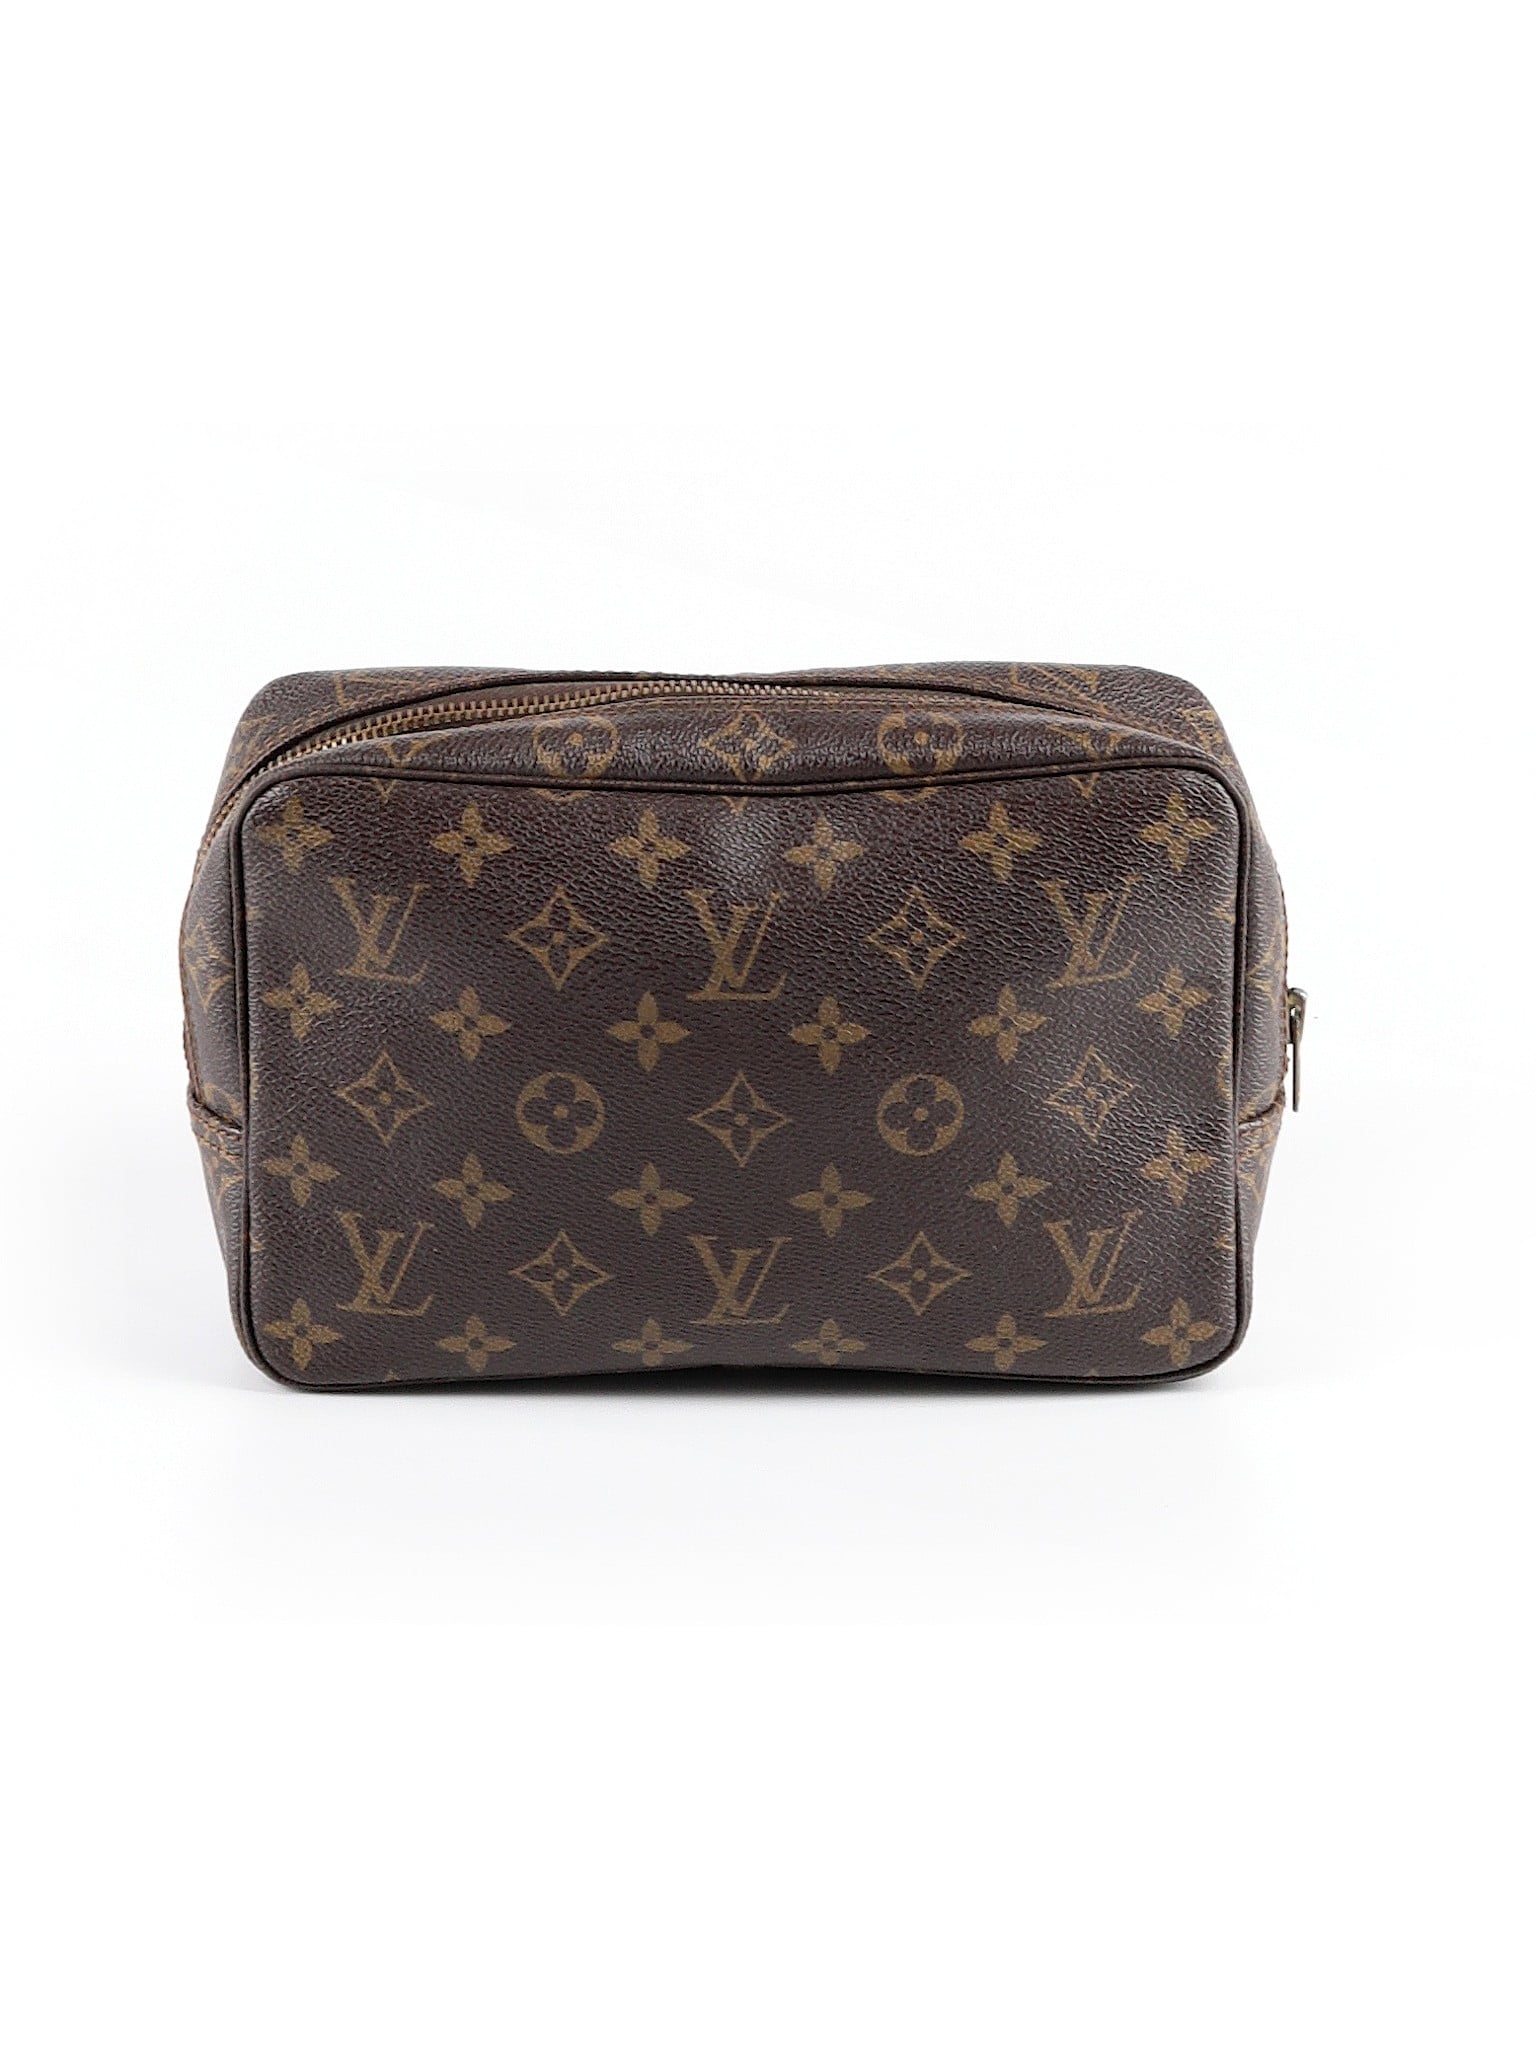 Pre-Owned Louis Vuitton Women&#39;s One Size Fits All Makeup Bag - www.semadata.org - www.semadata.org